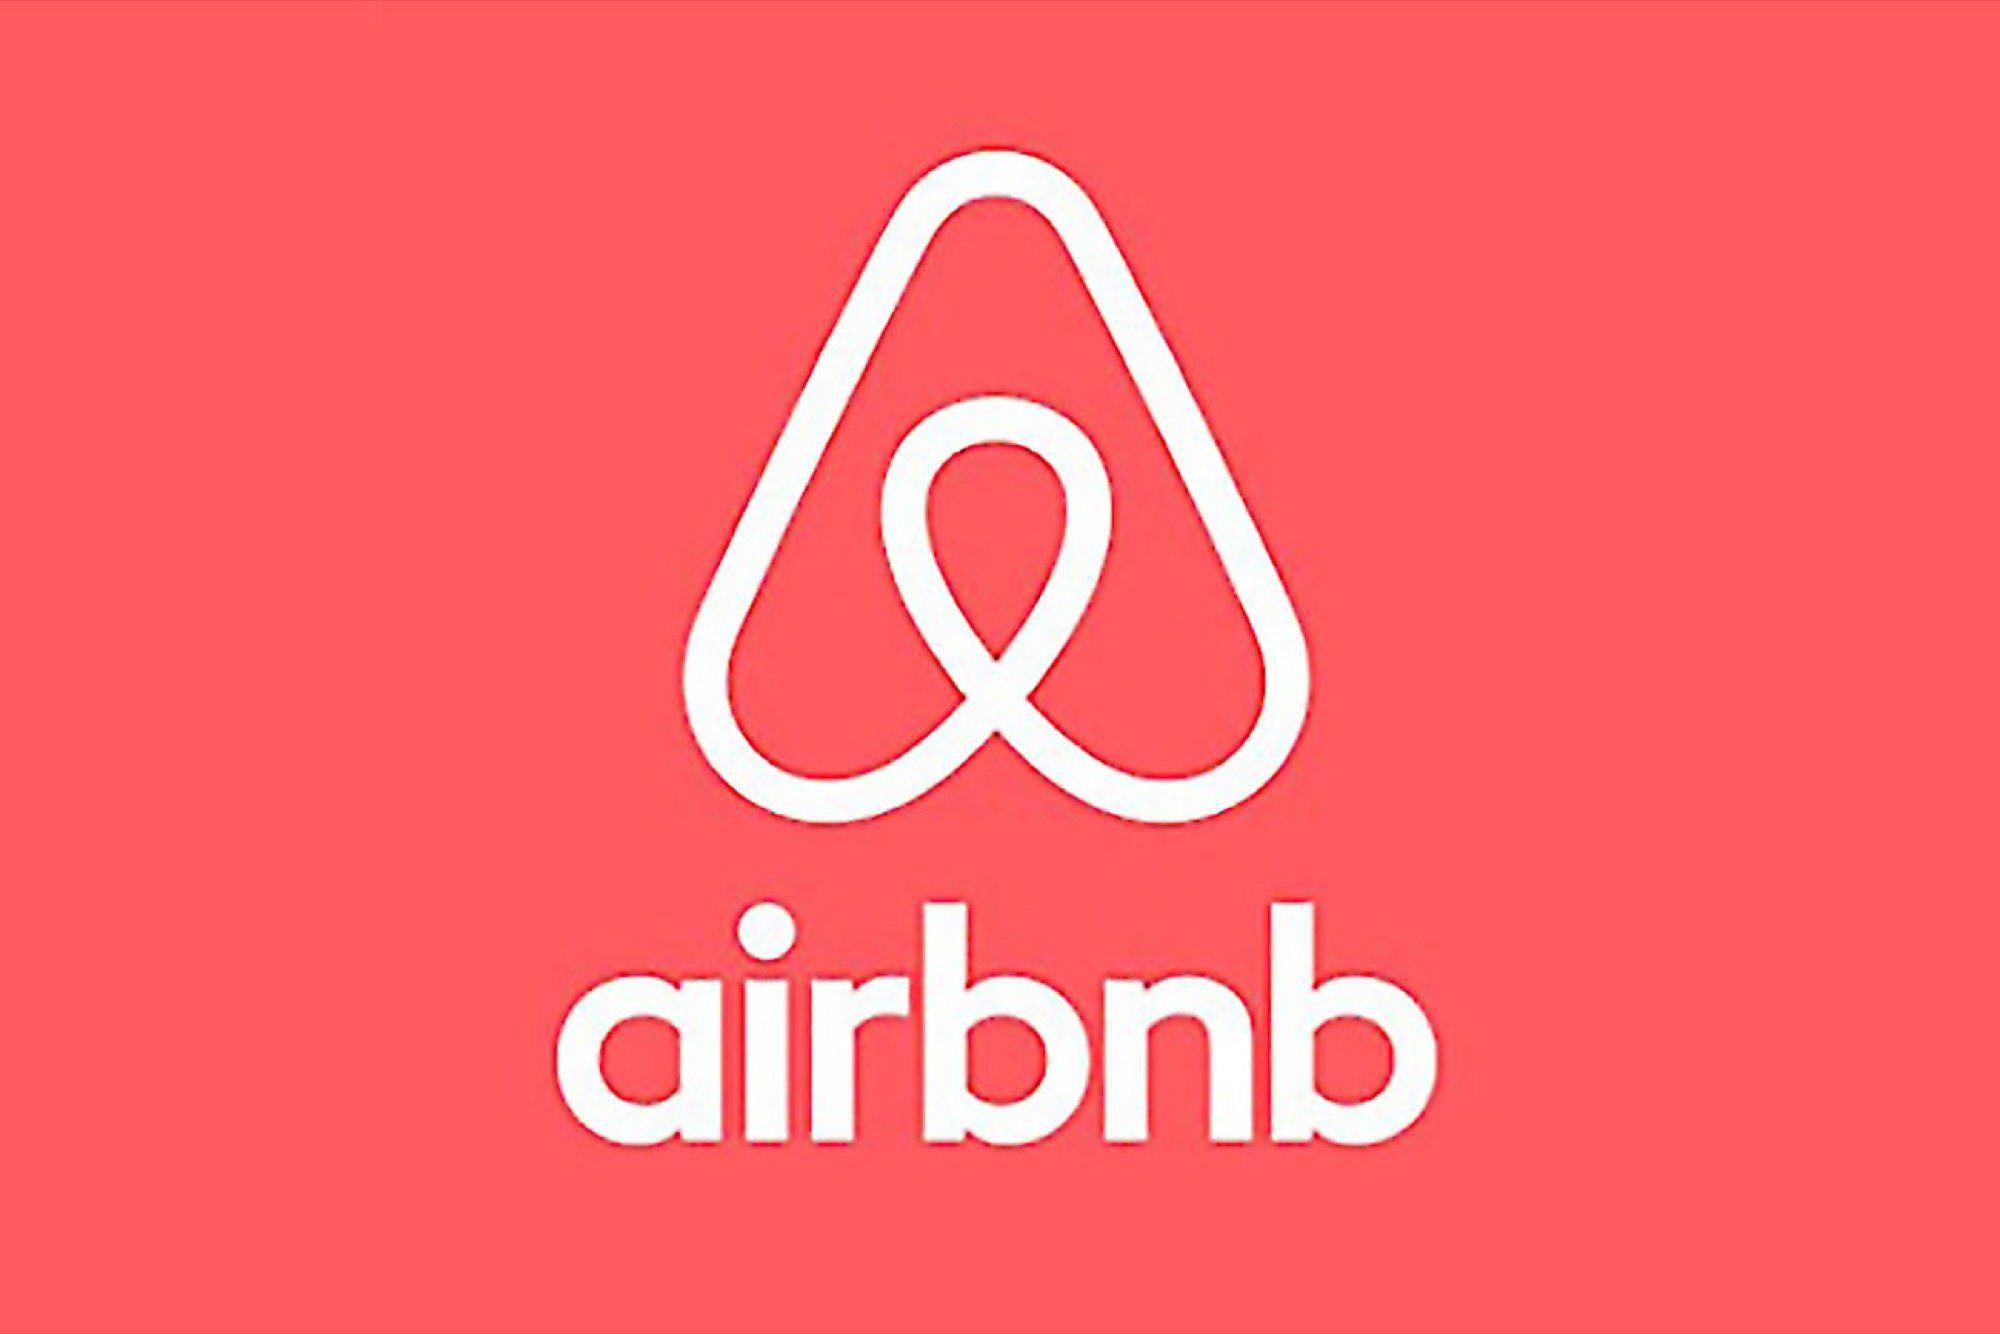 Airbnb Logo - Airbnb, Why the New Logo?